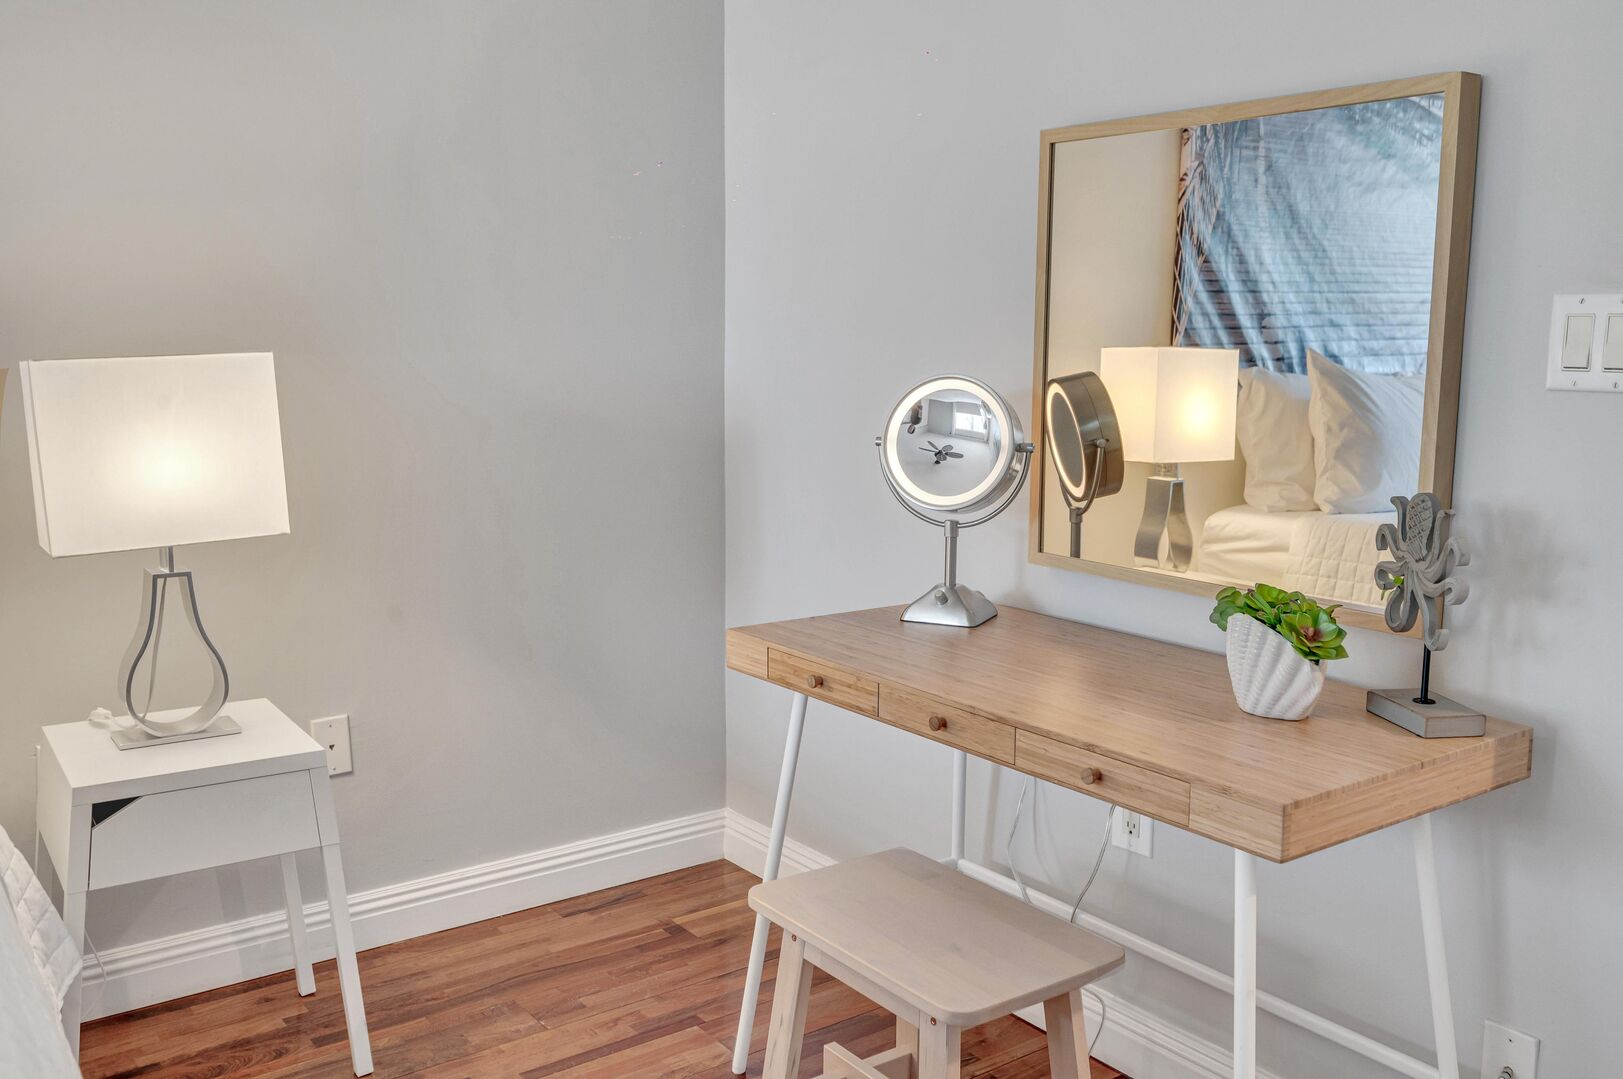 Find the perfect balance of productivity and comfort in our work-friendly bedroom. Transform our cozy space into your personal office, complete with a convenient work desk. Work smart, rest well – all in one place.